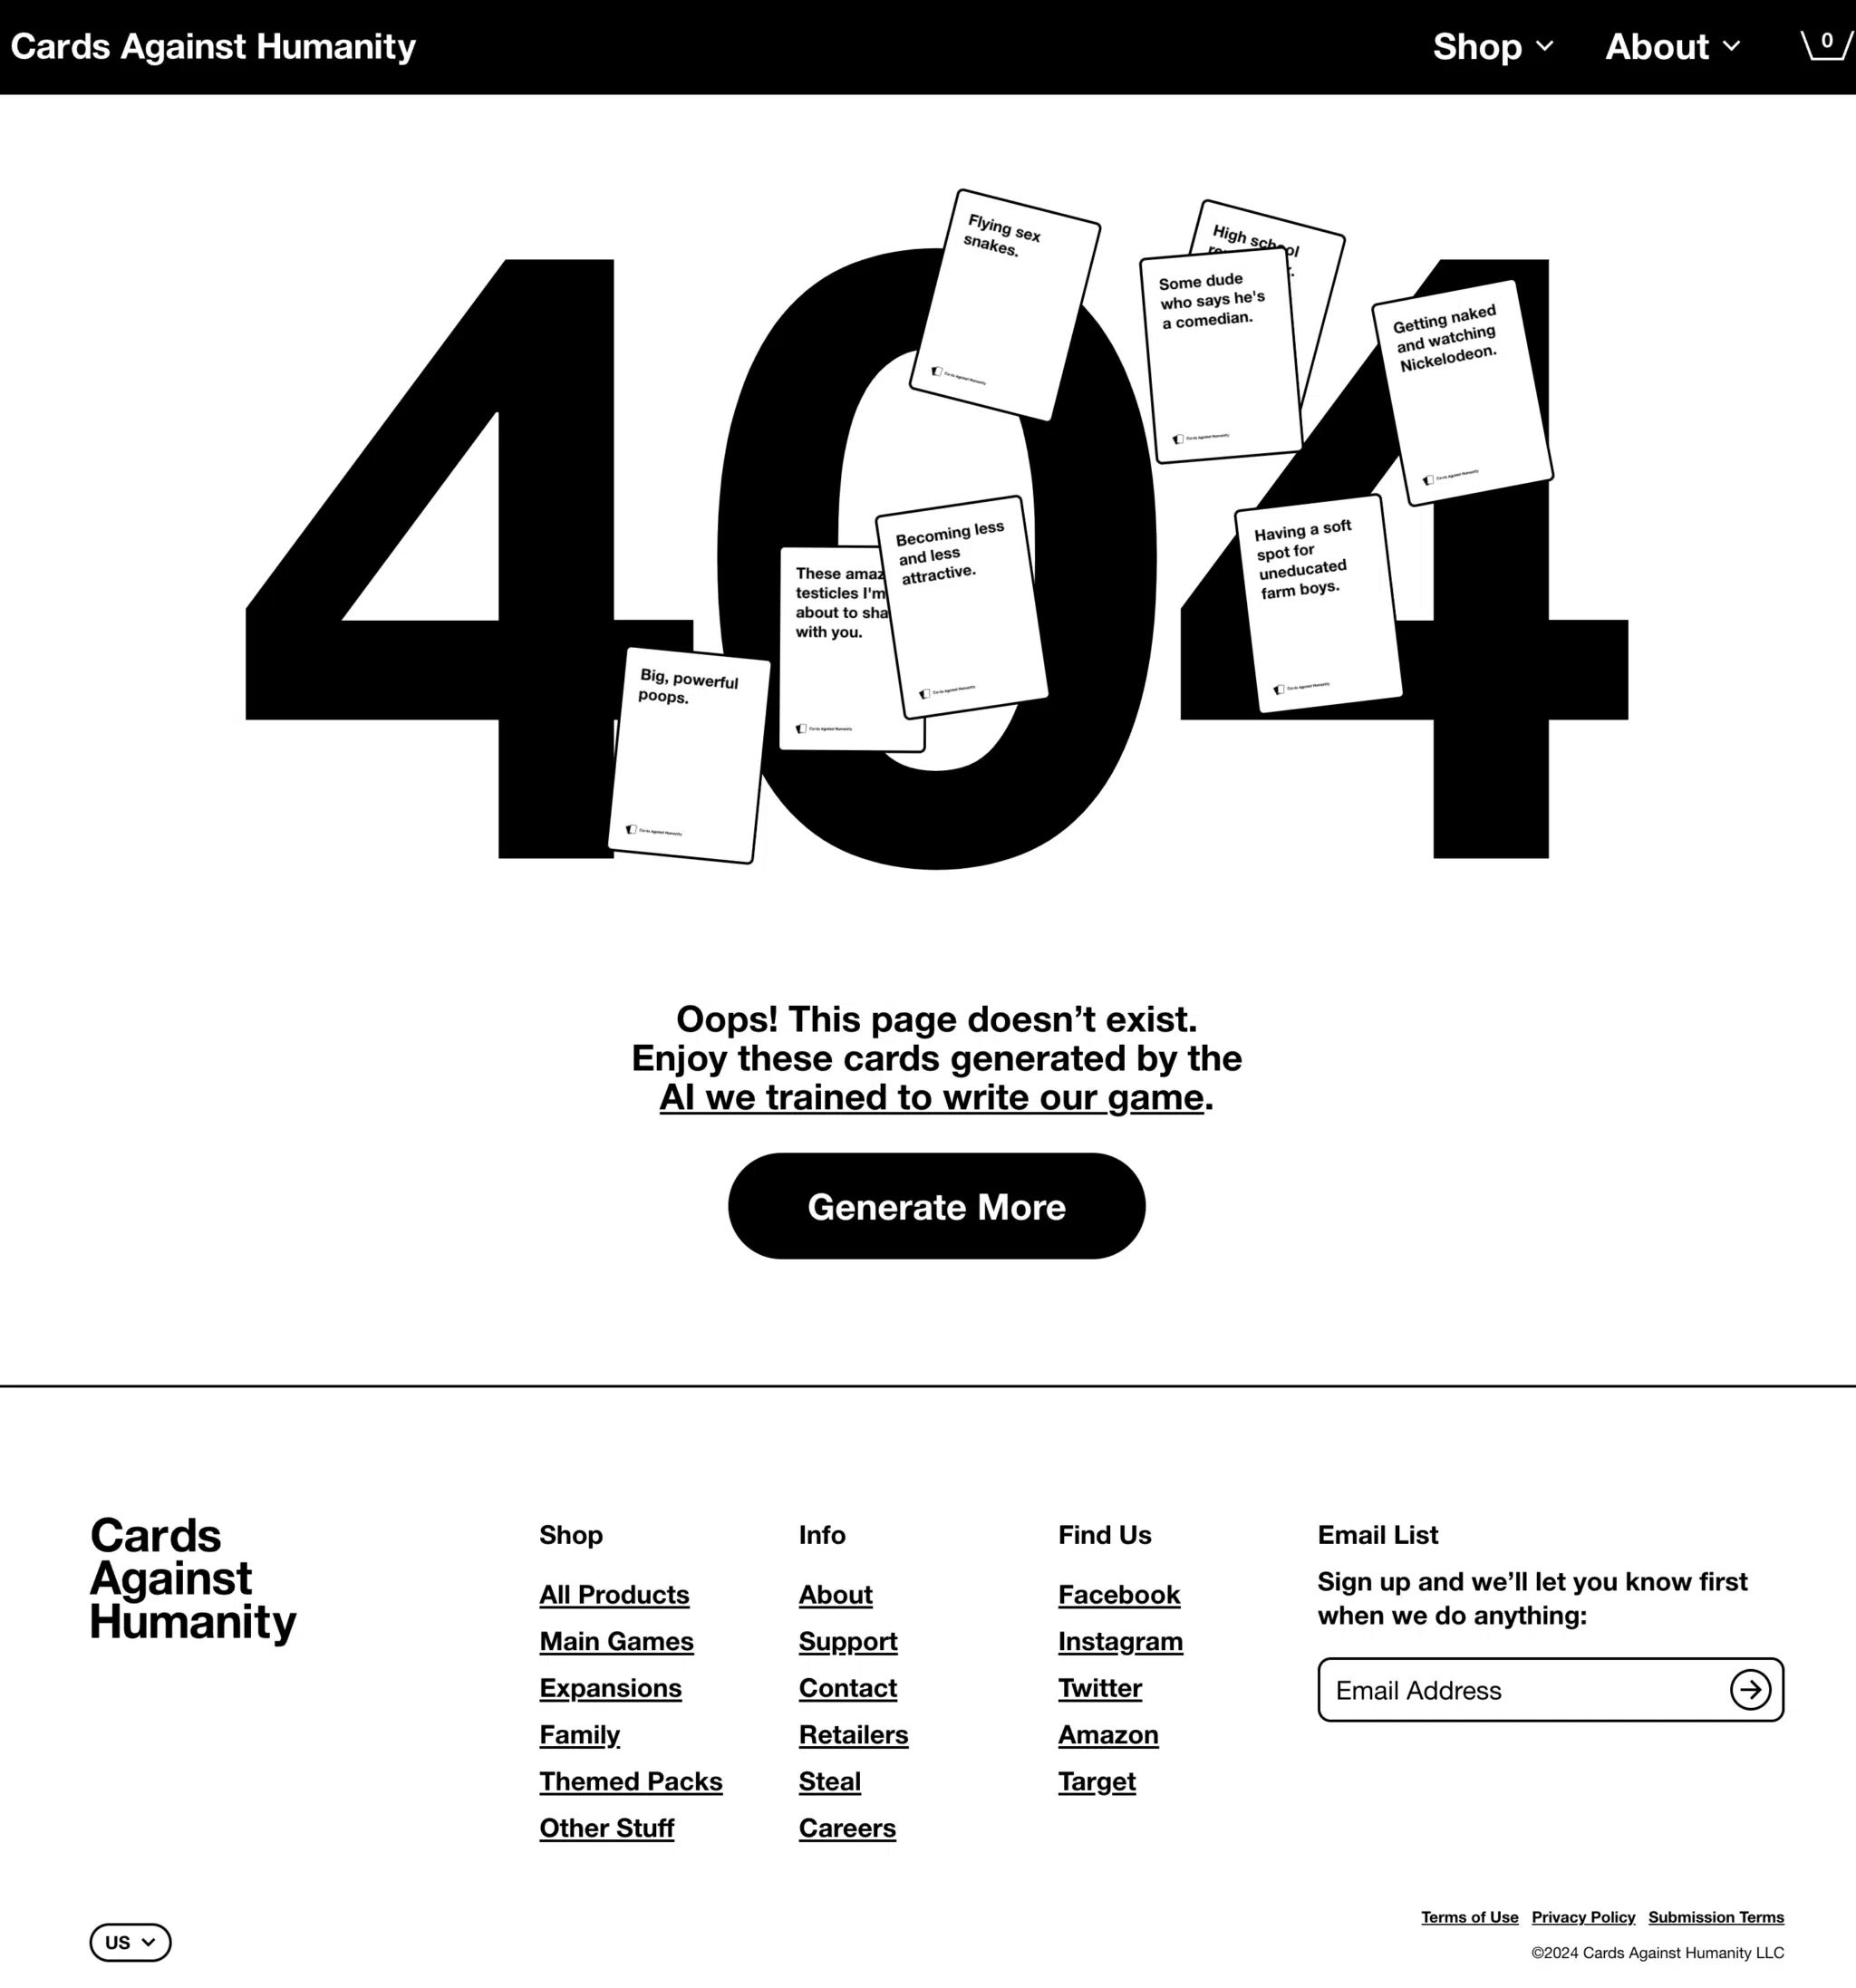 Cards Against Humanity 404 page